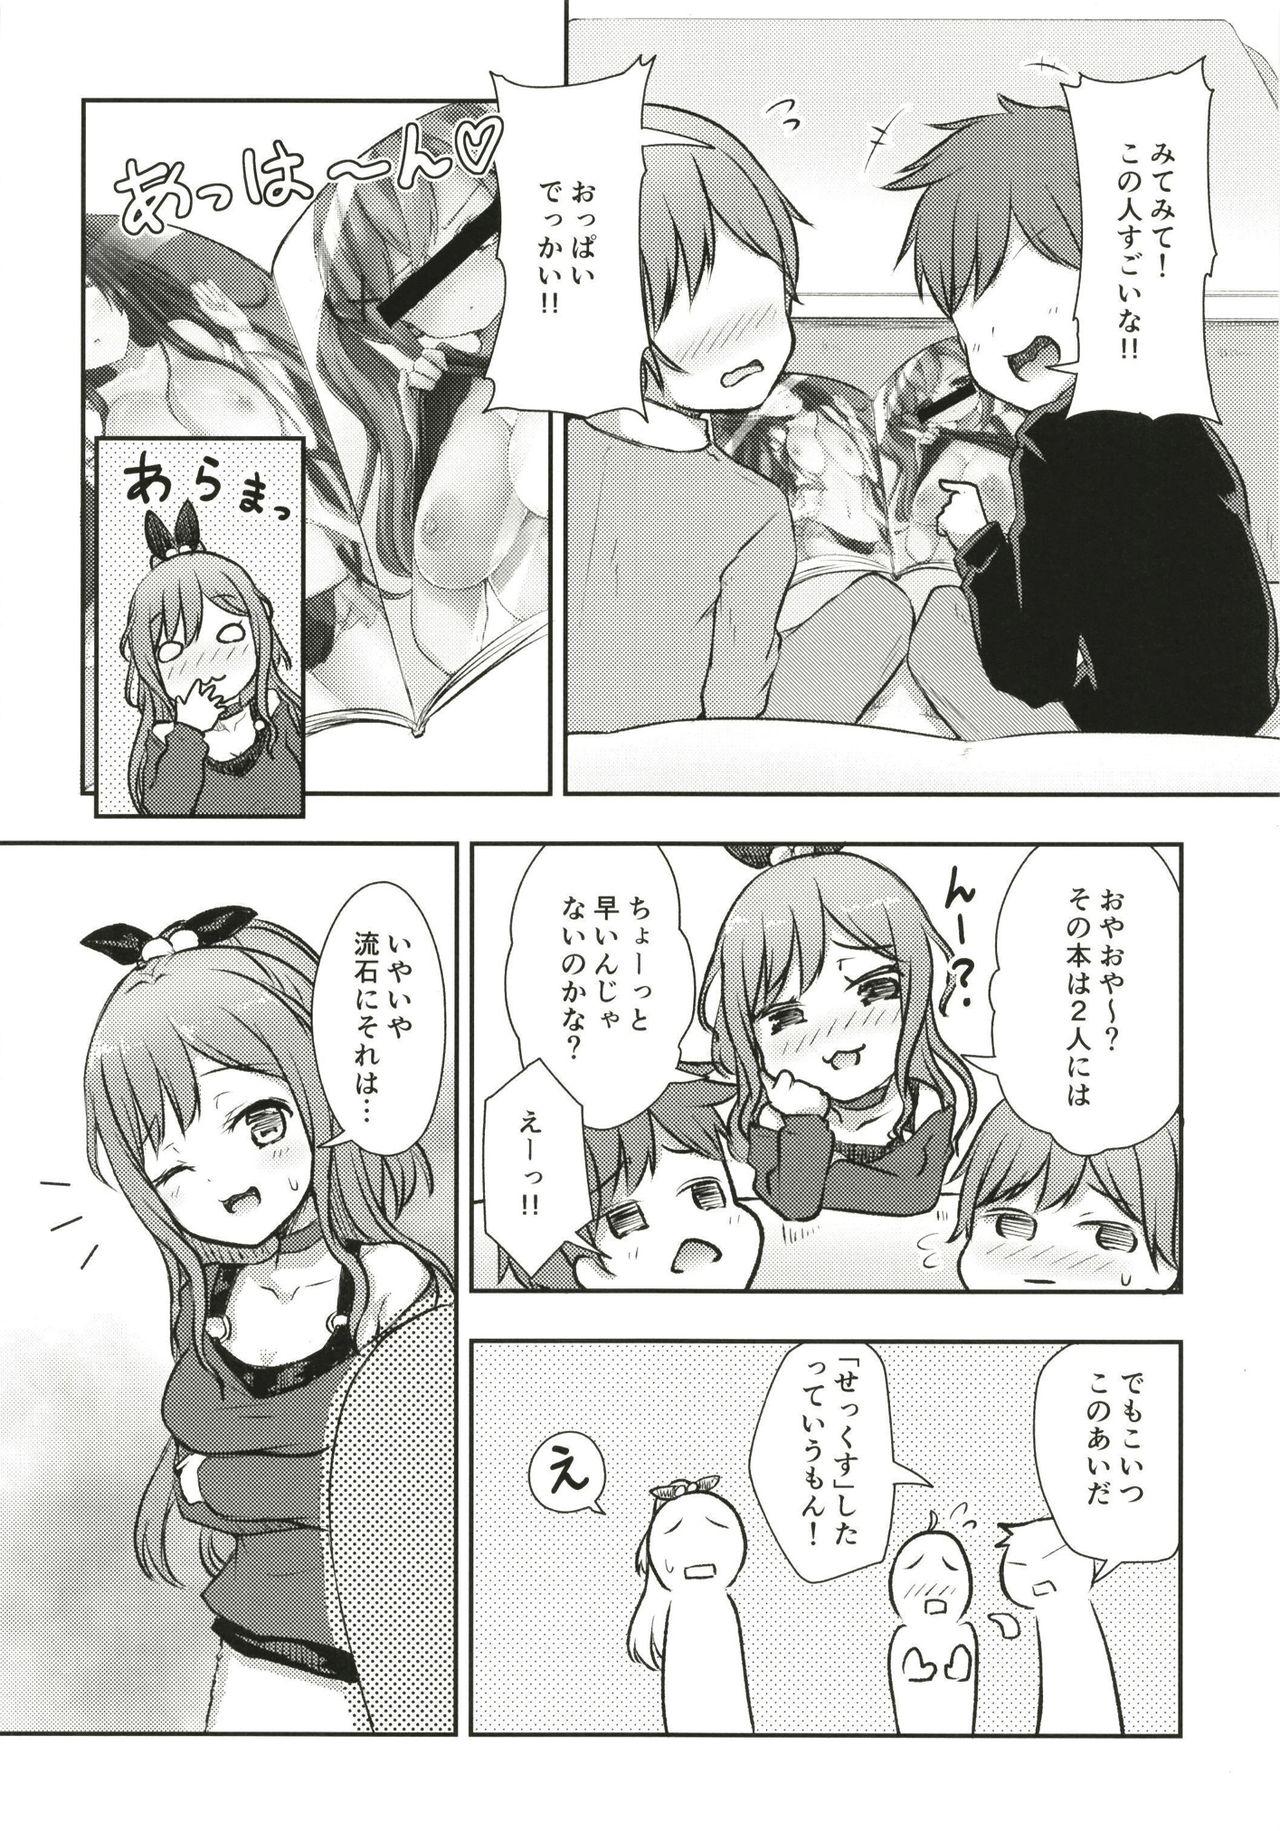 Olderwoman Hearty Hybrid Household - Bang dream Spycam - Page 4